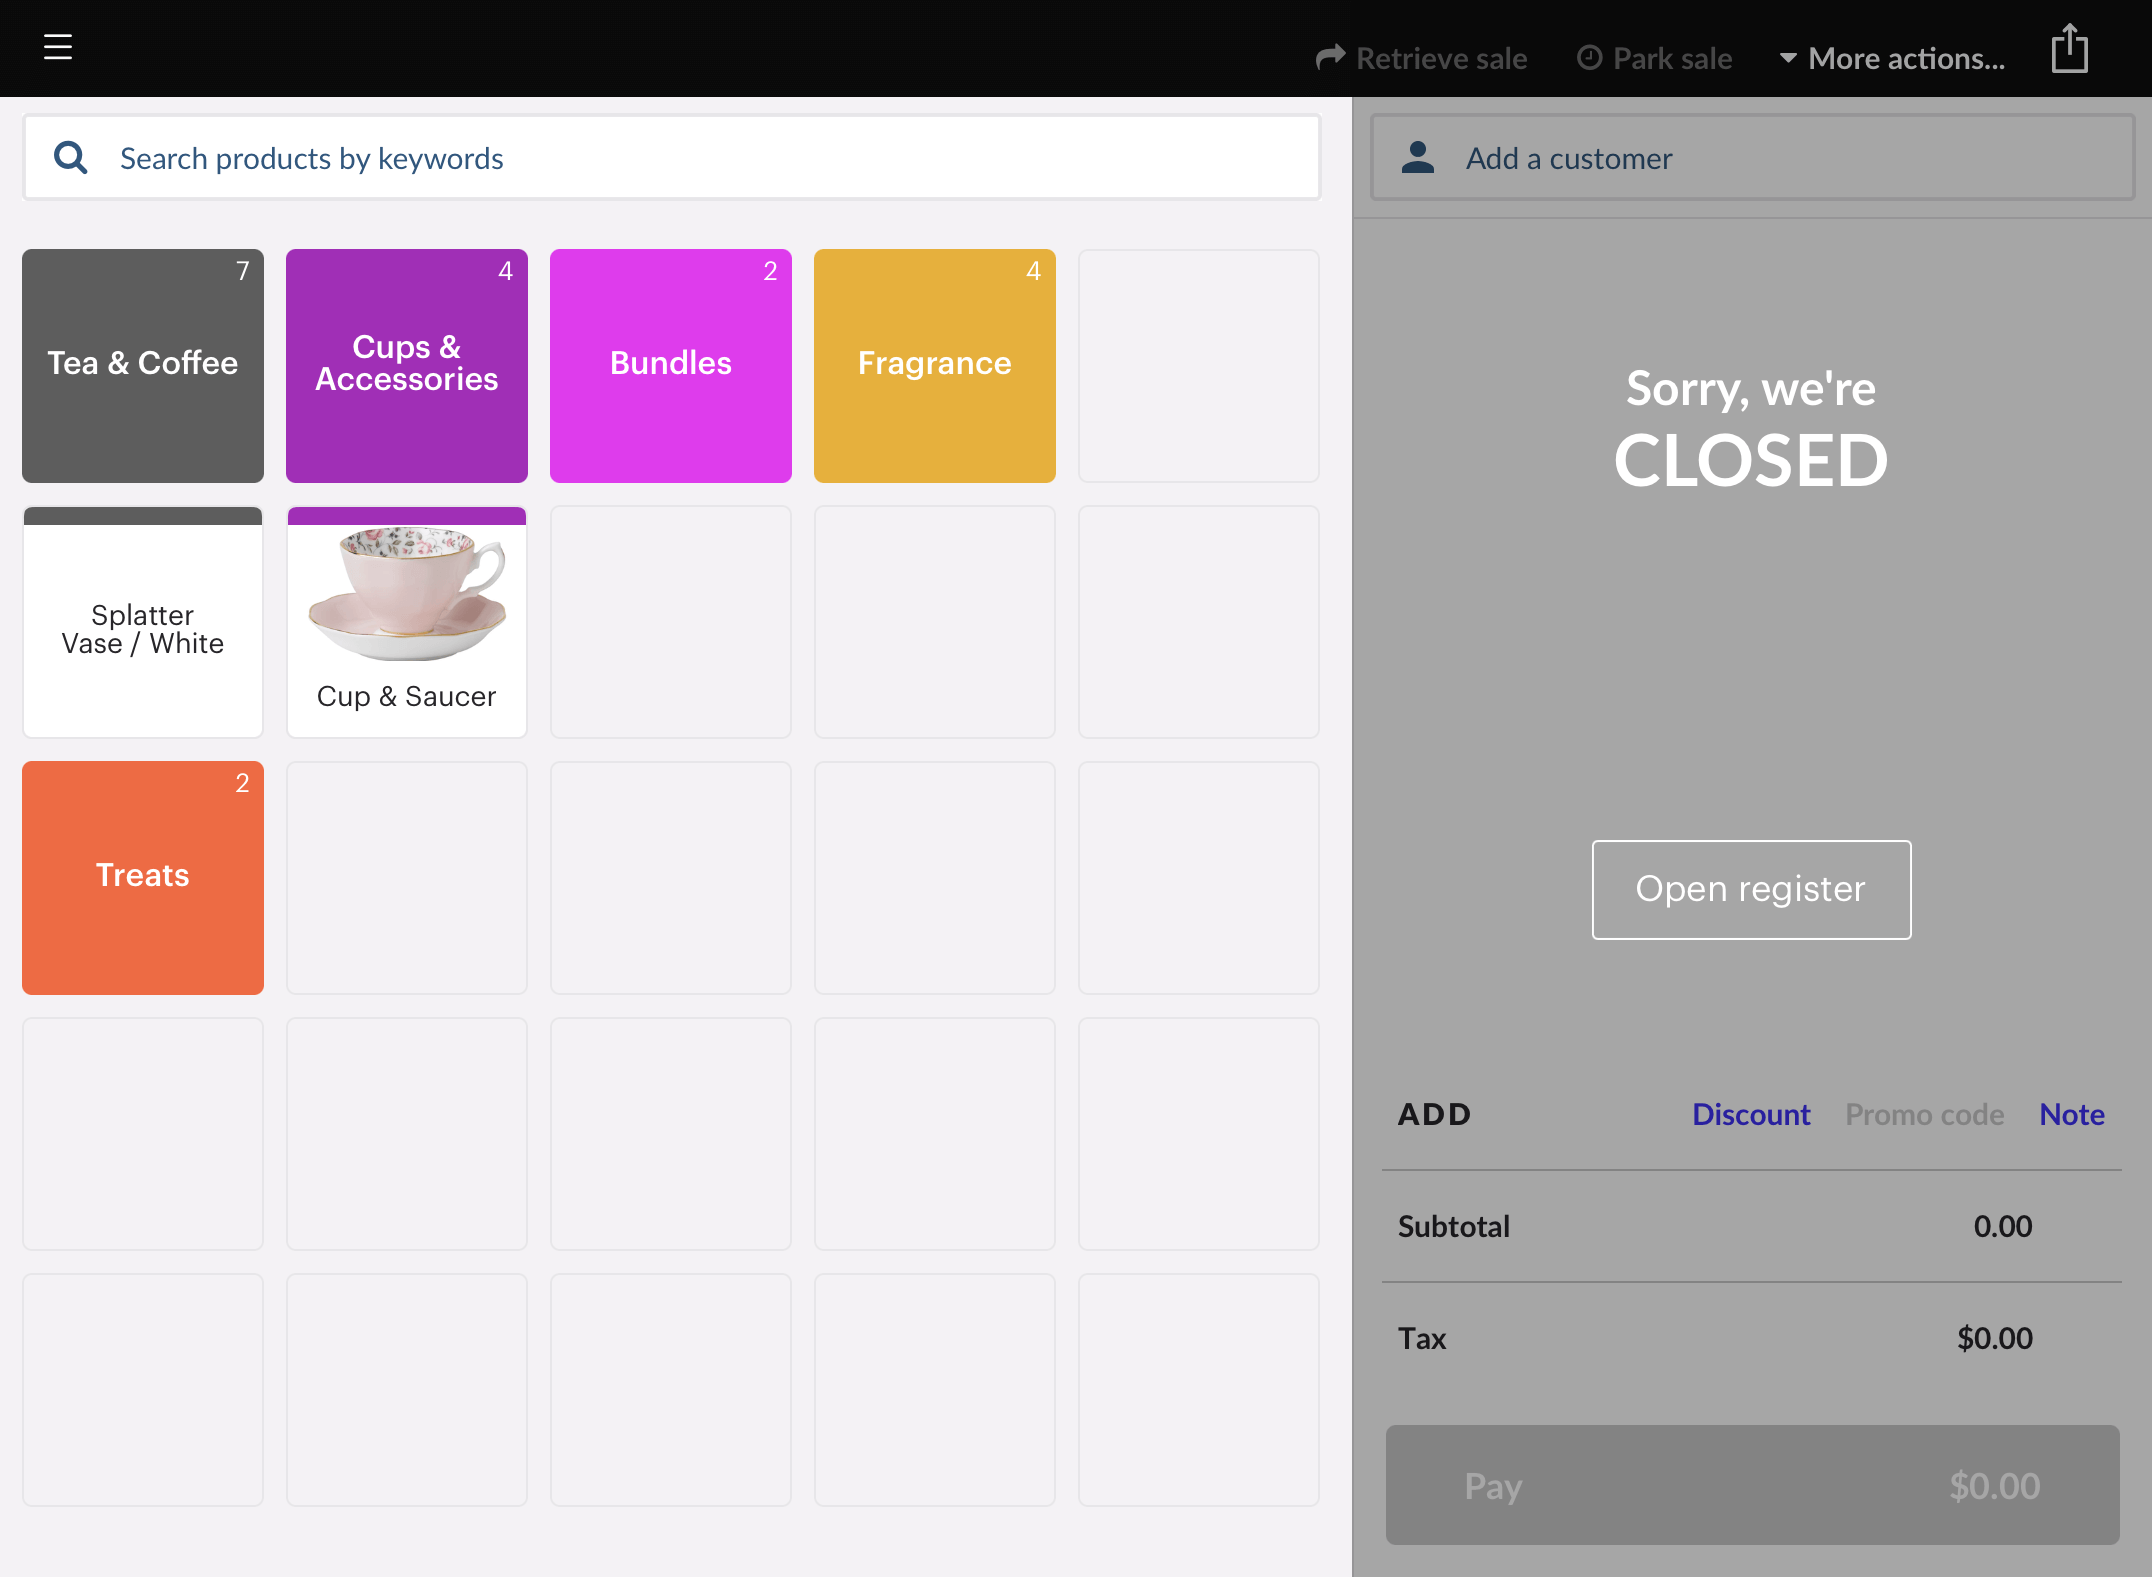 Sell screen with register closed. Open register button displayed.